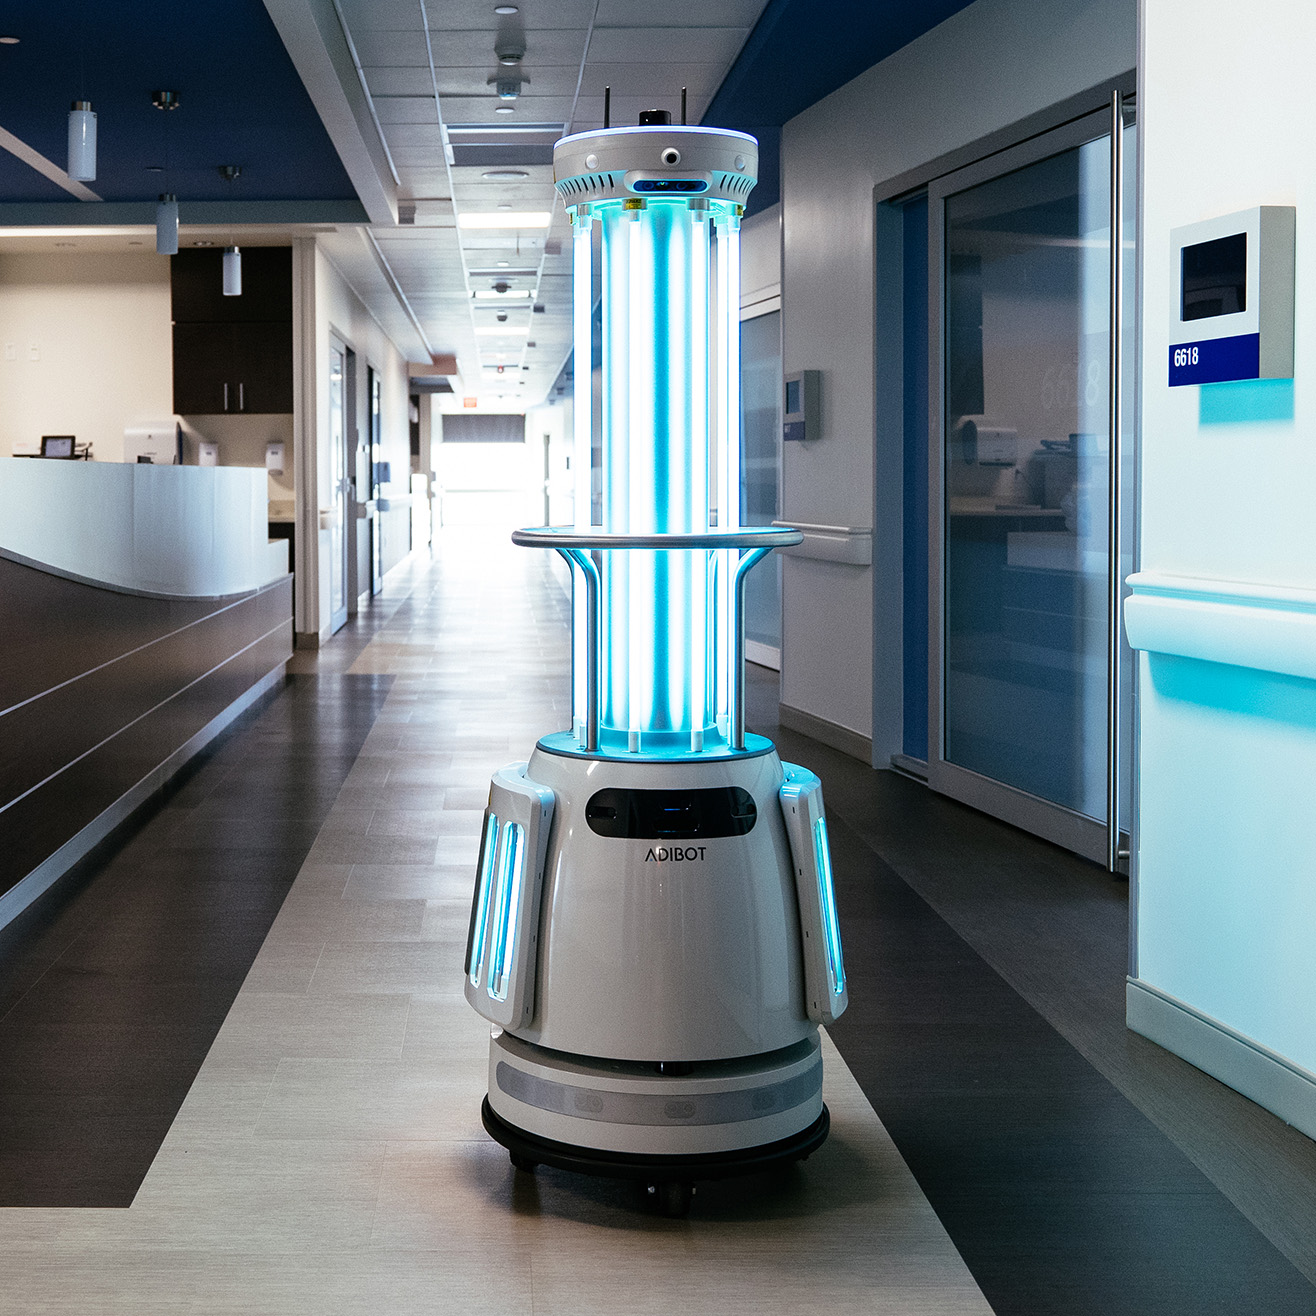 An ADIBOT A1 UV-C disinfection robot with UV-C lamps turned on in a hospital corridor.